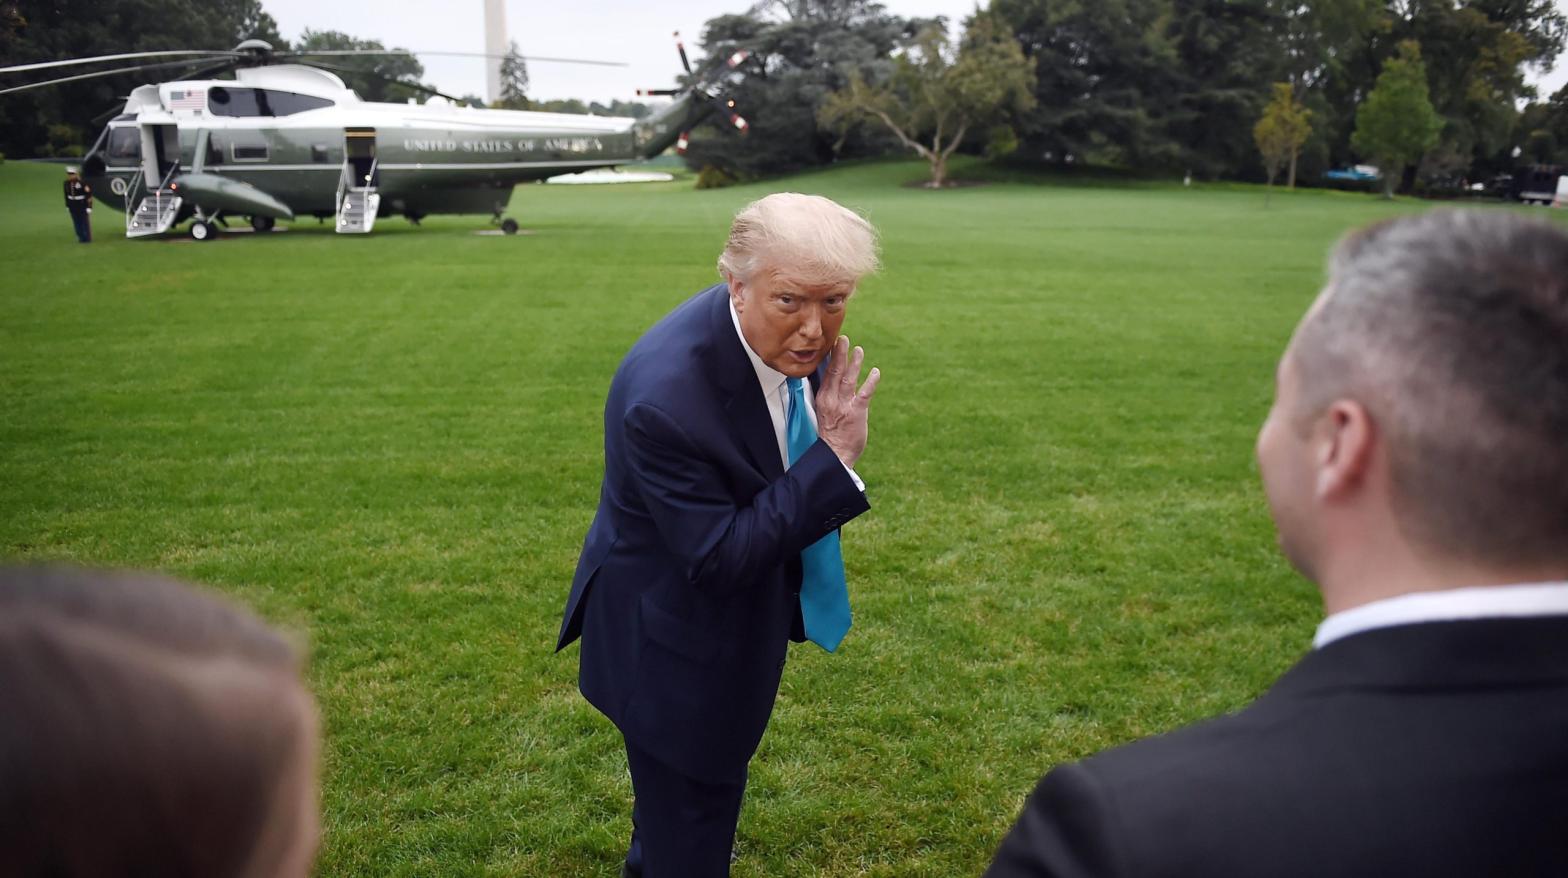 Former President Donald Trump on the South Lawn of the White House on September 26, 2020.  (Photo: Olivier Douliery / AFP, Getty Images)